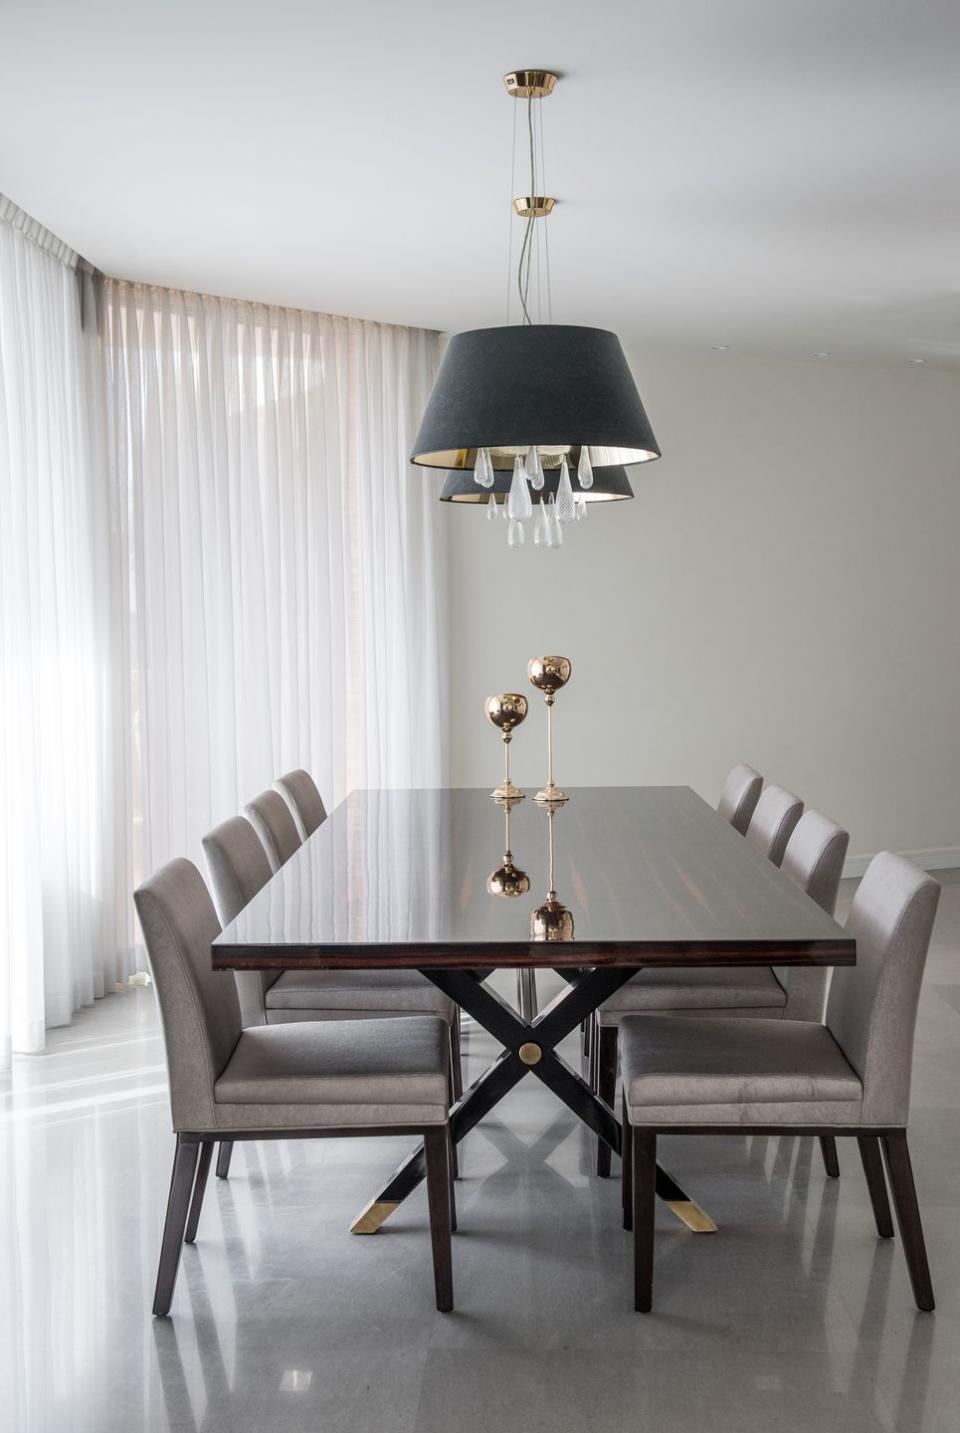 Dining room featuring a high-gloss ebony table with brass details